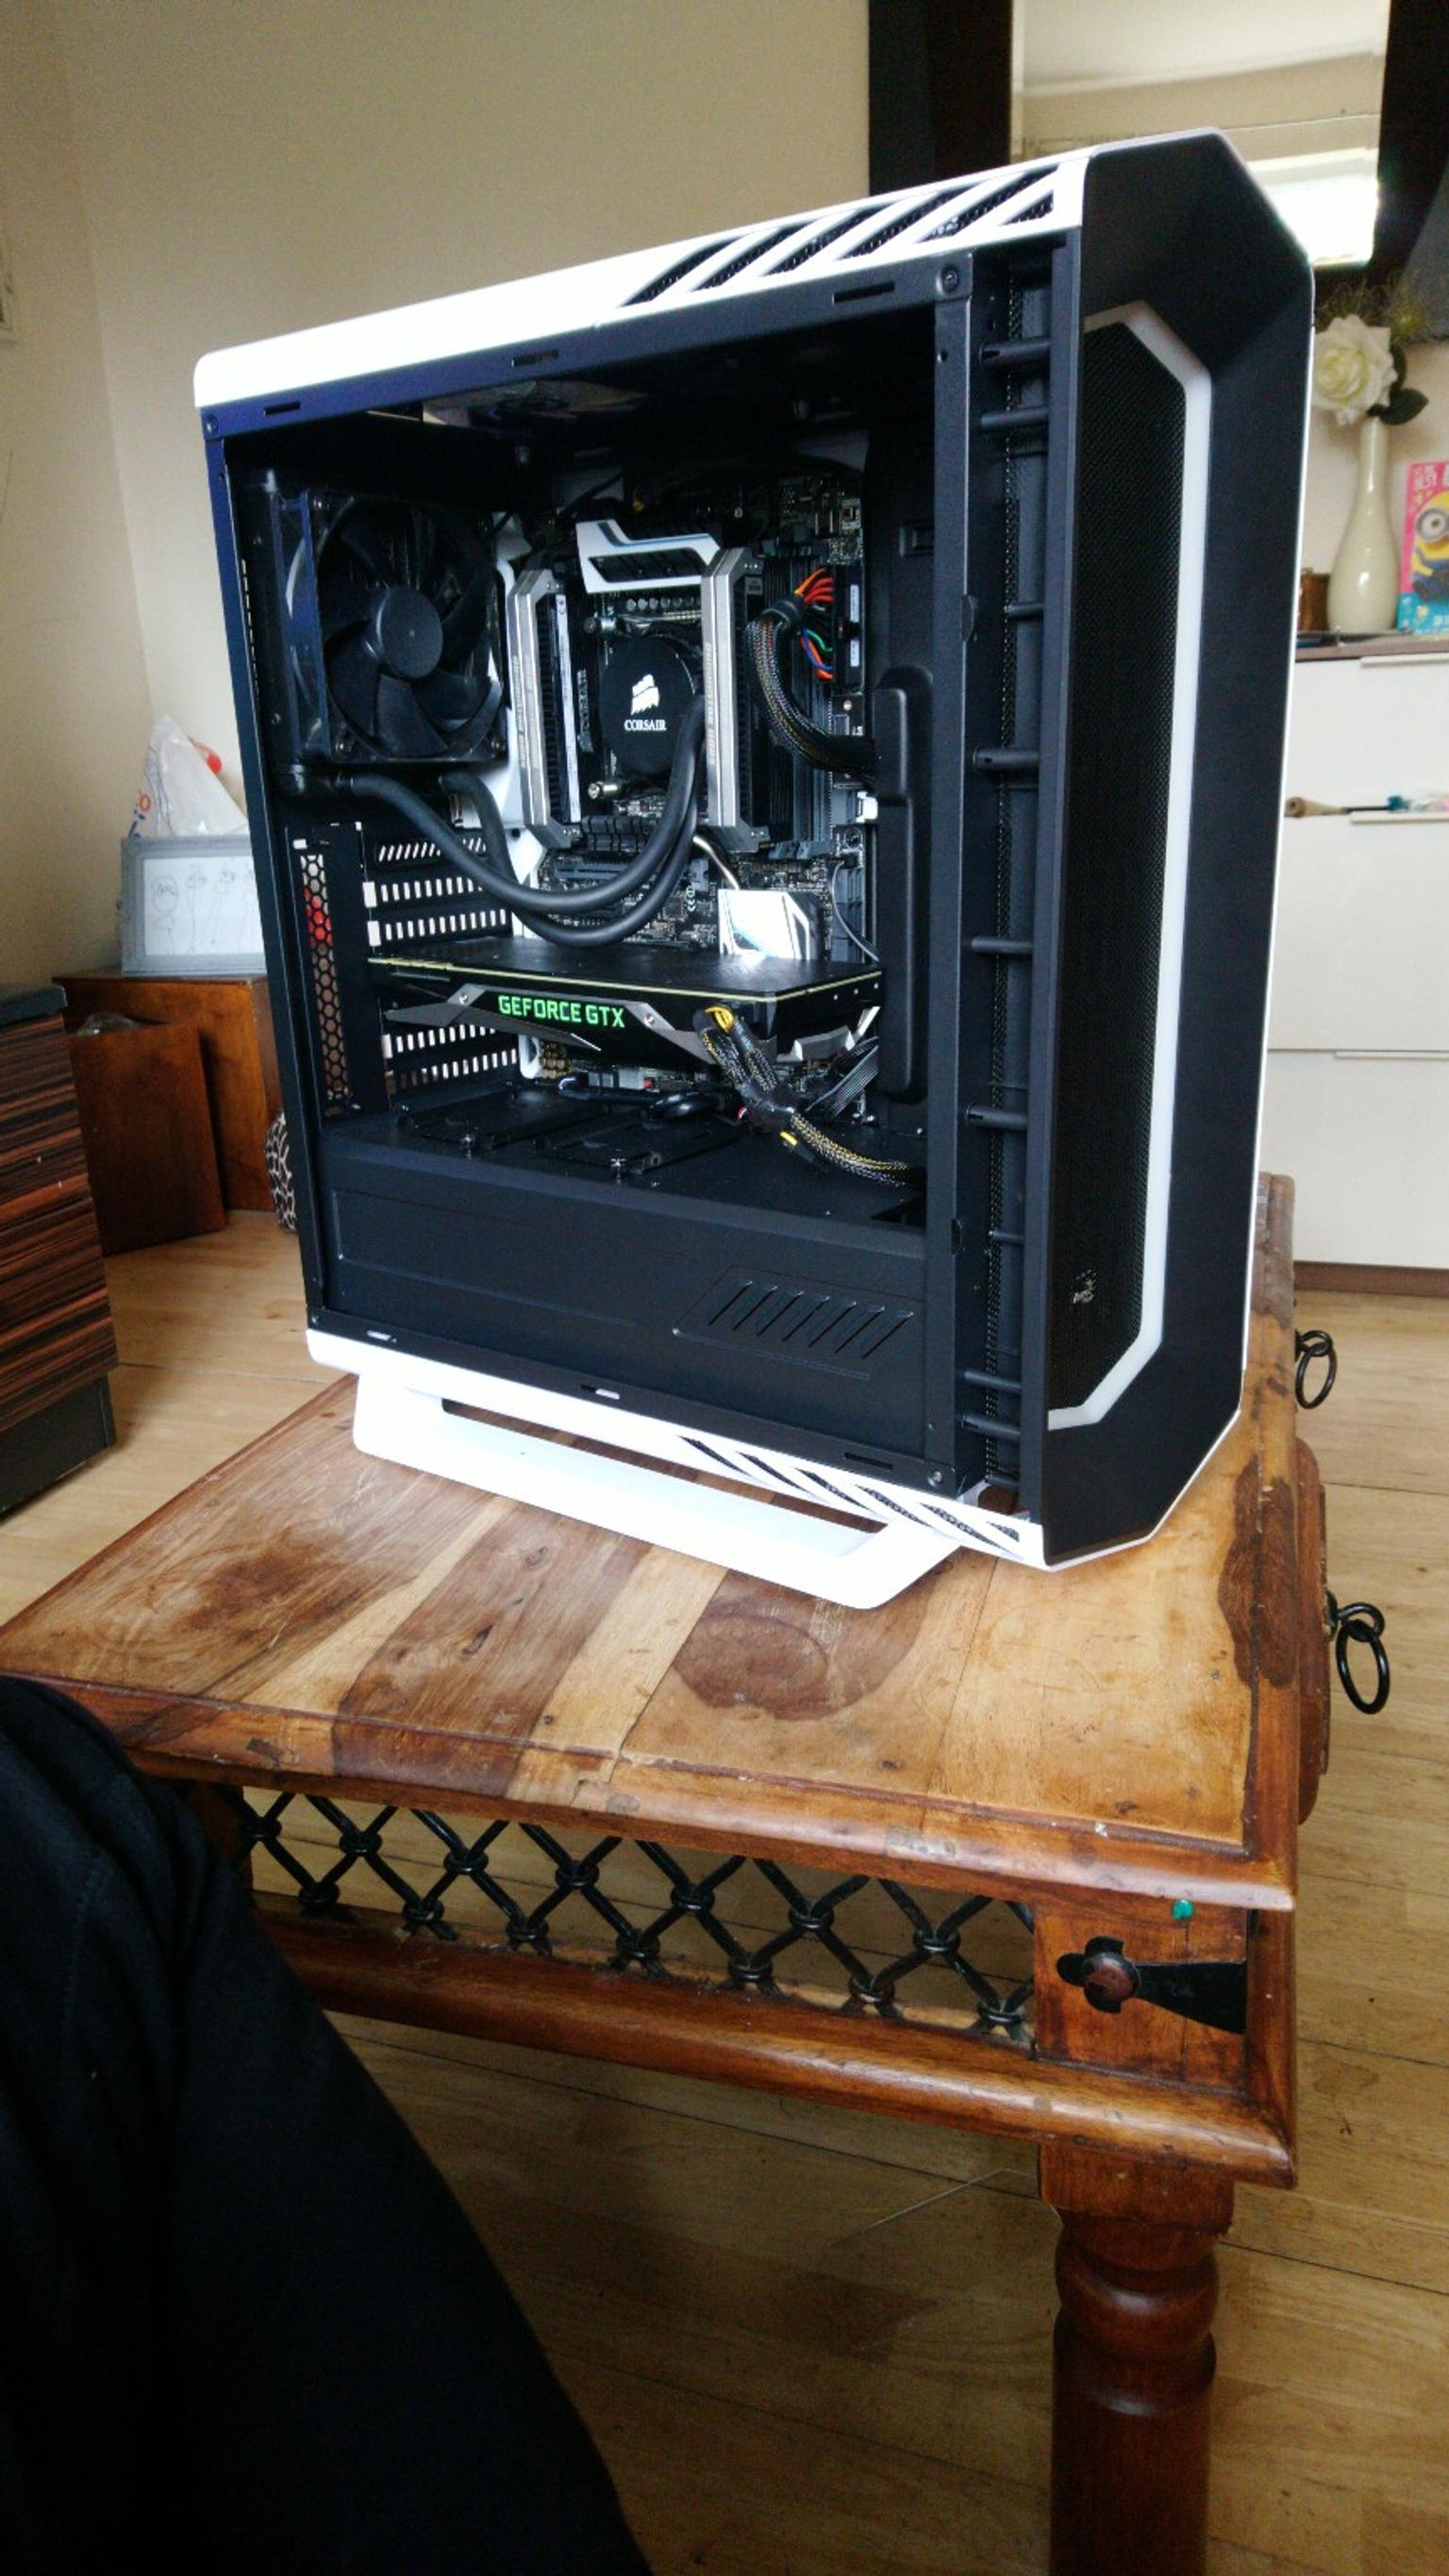 High End Gaming Pc For Laptop And Cash In Wf7 Wakefield Fur 950 00